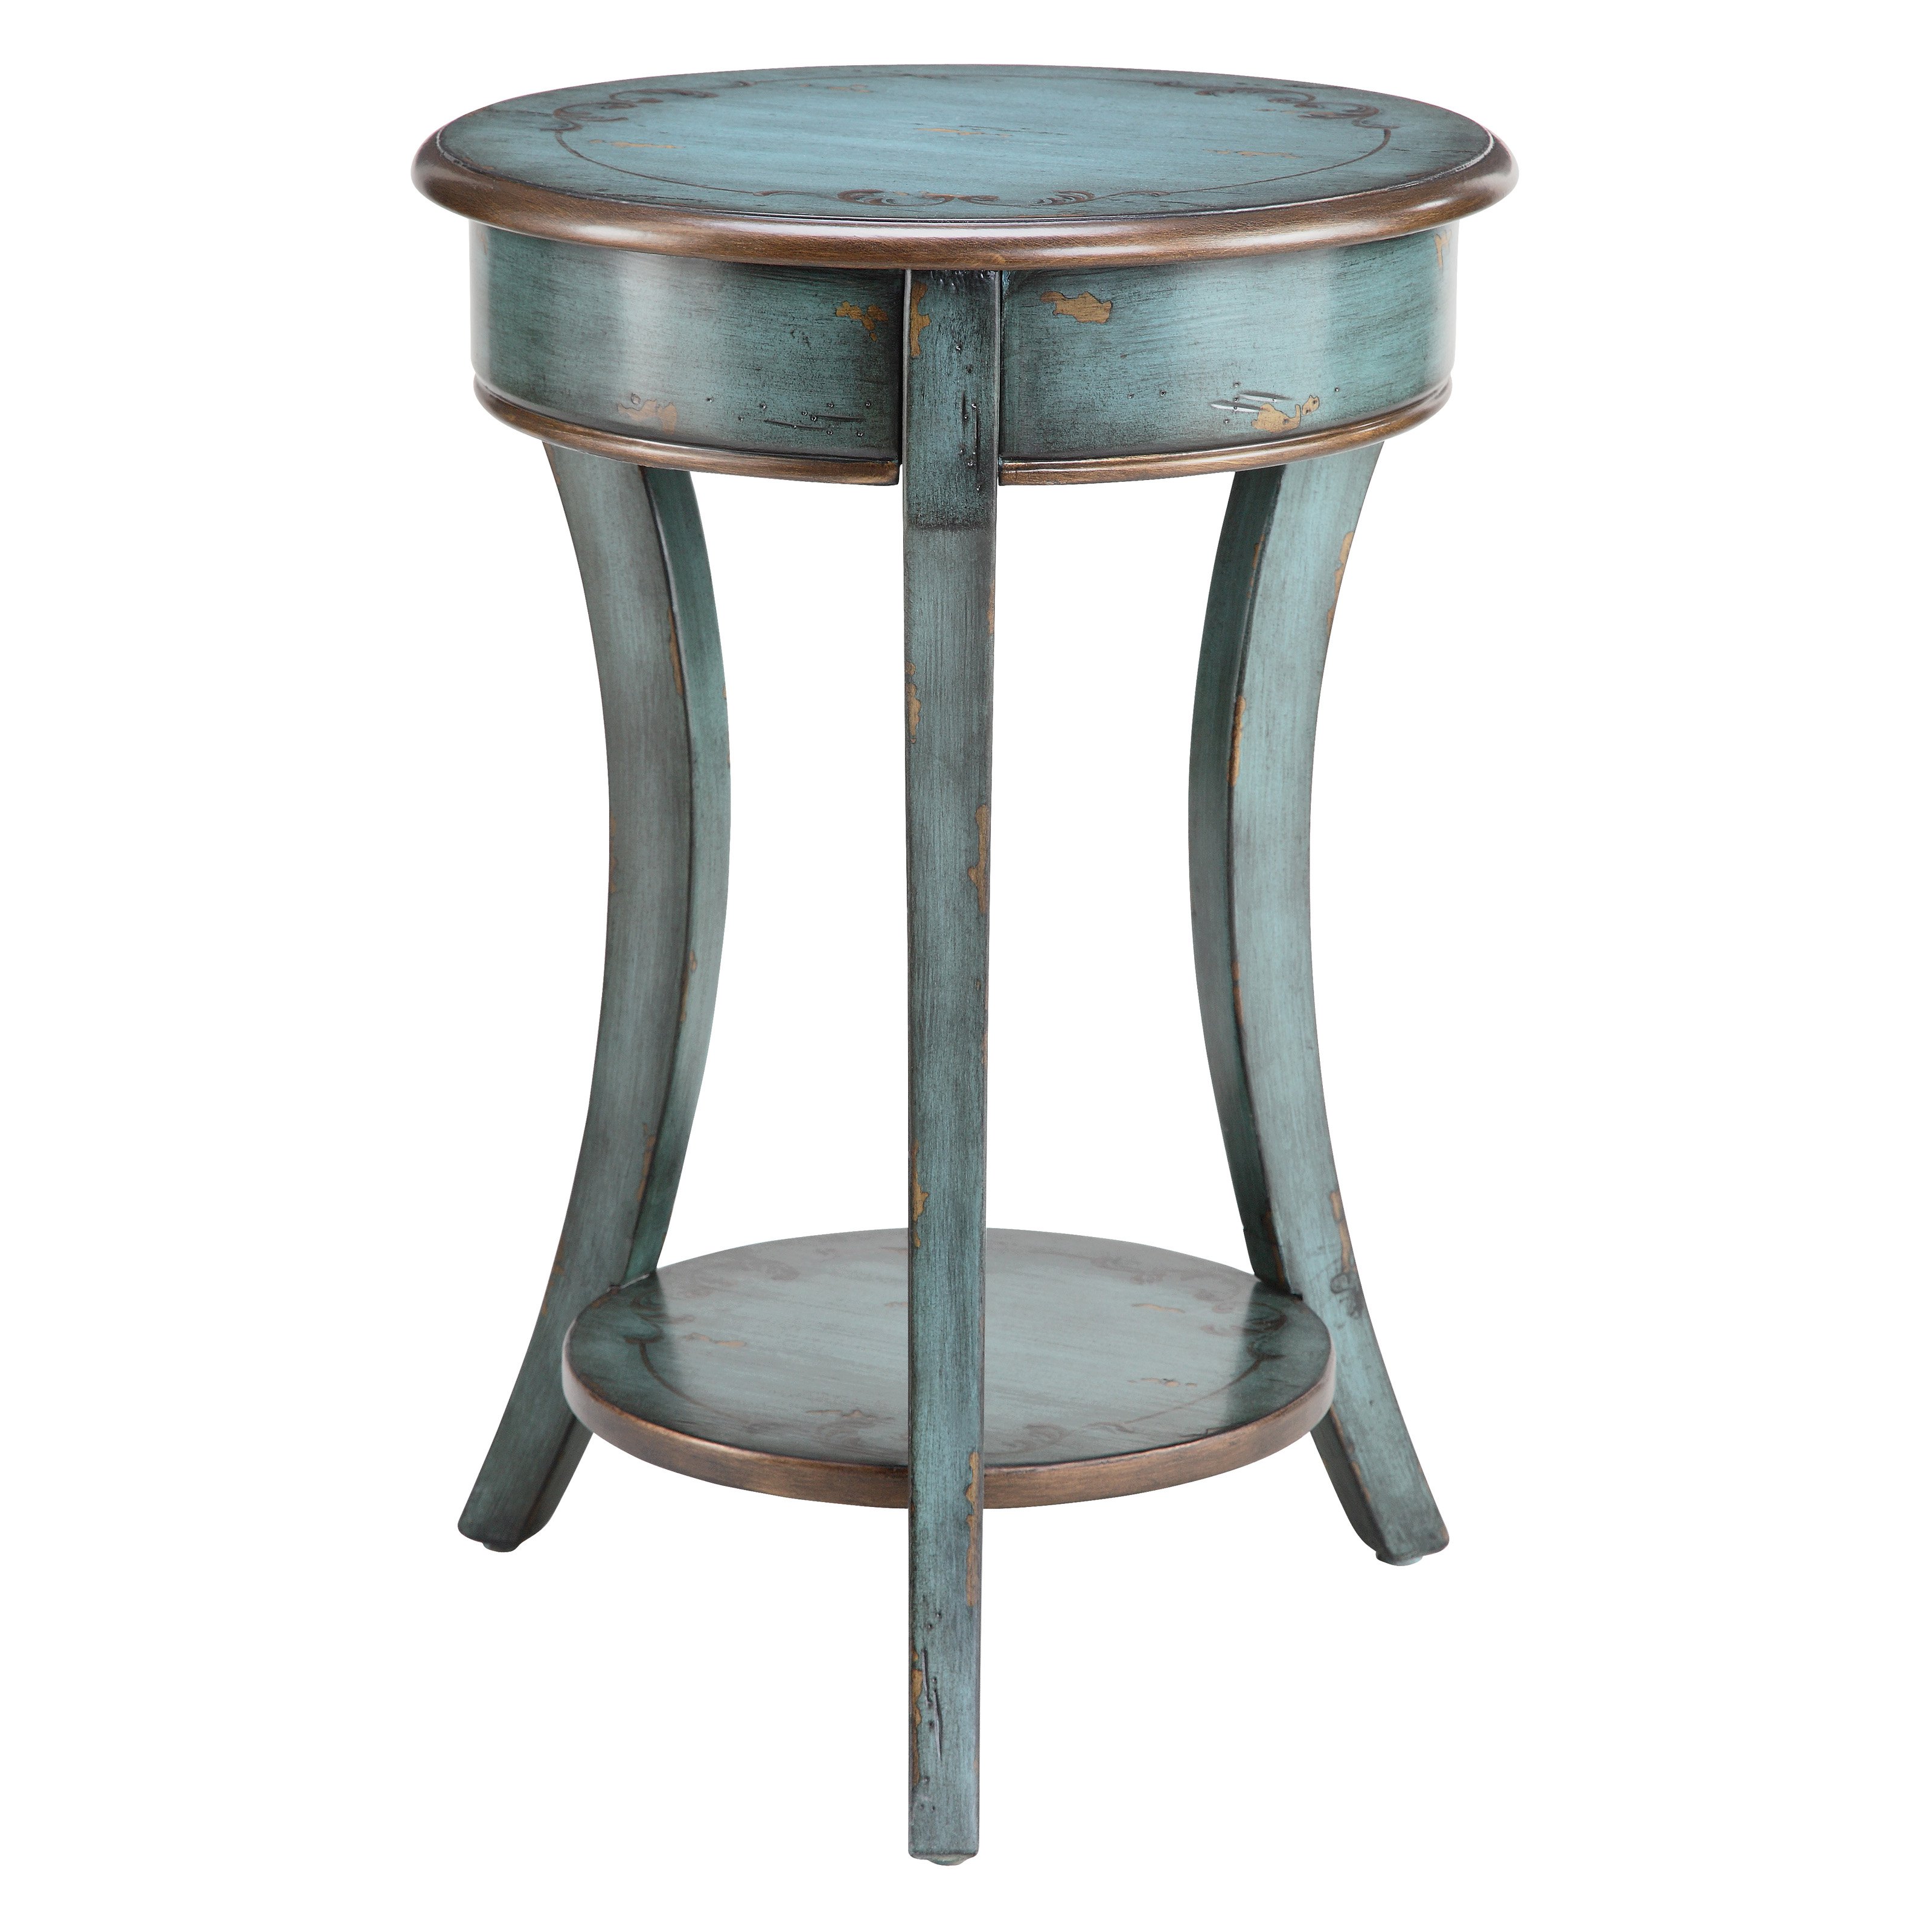 stein world freya accent table end tables ashley small round with drawer marble bedside target dining chairs kijiji industrial side battery powered room lights west elm leather